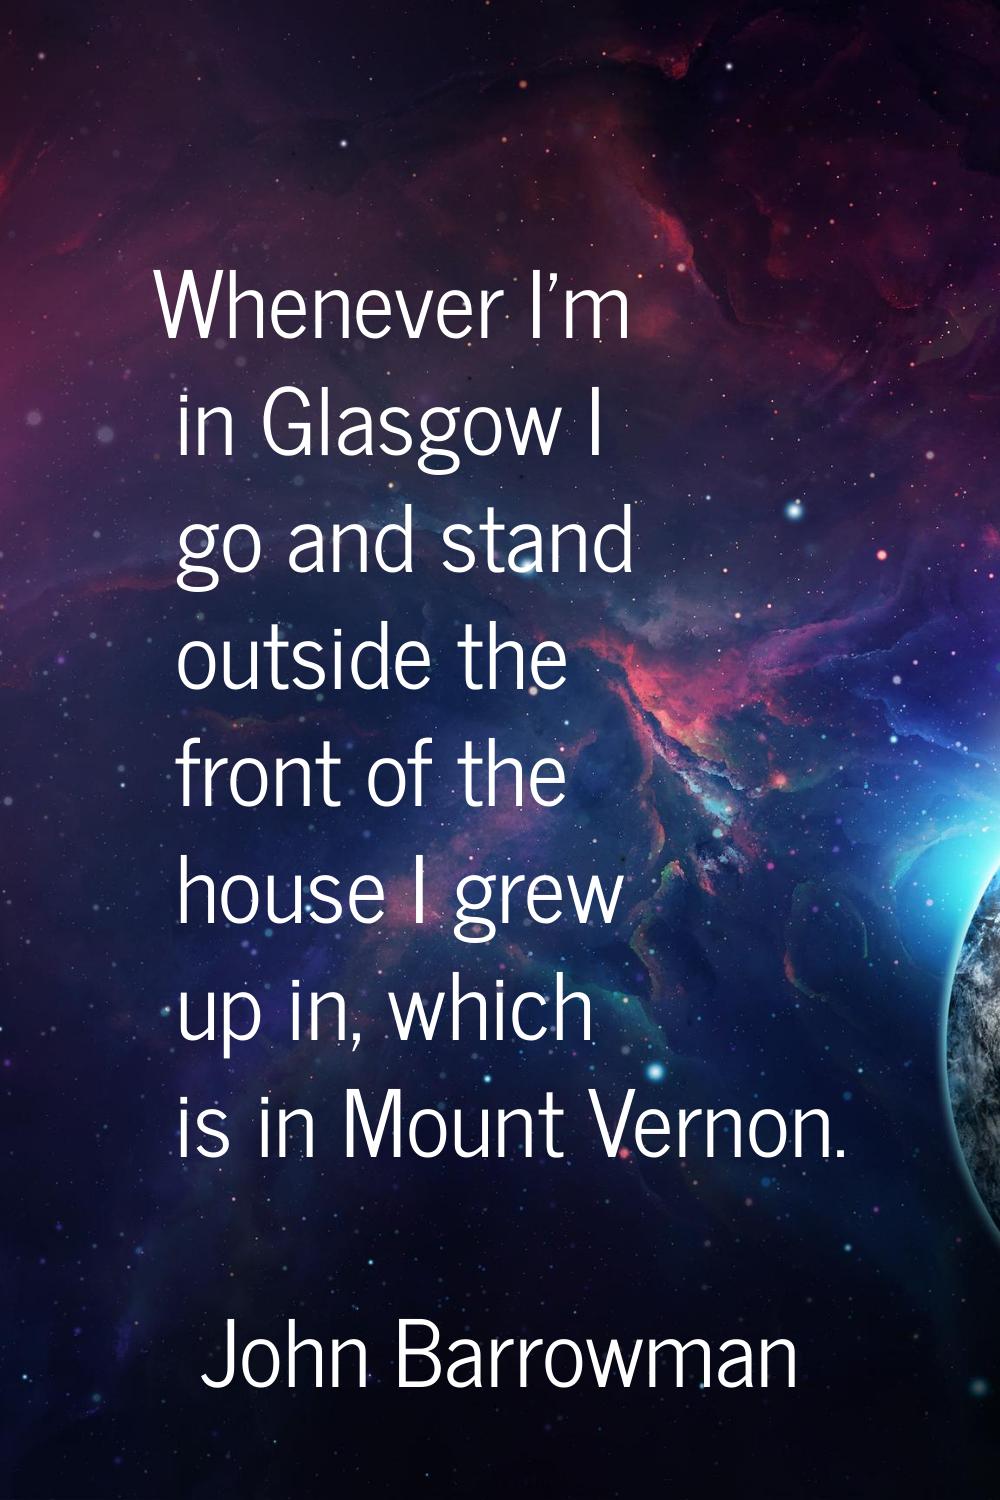 Whenever I'm in Glasgow I go and stand outside the front of the house I grew up in, which is in Mou